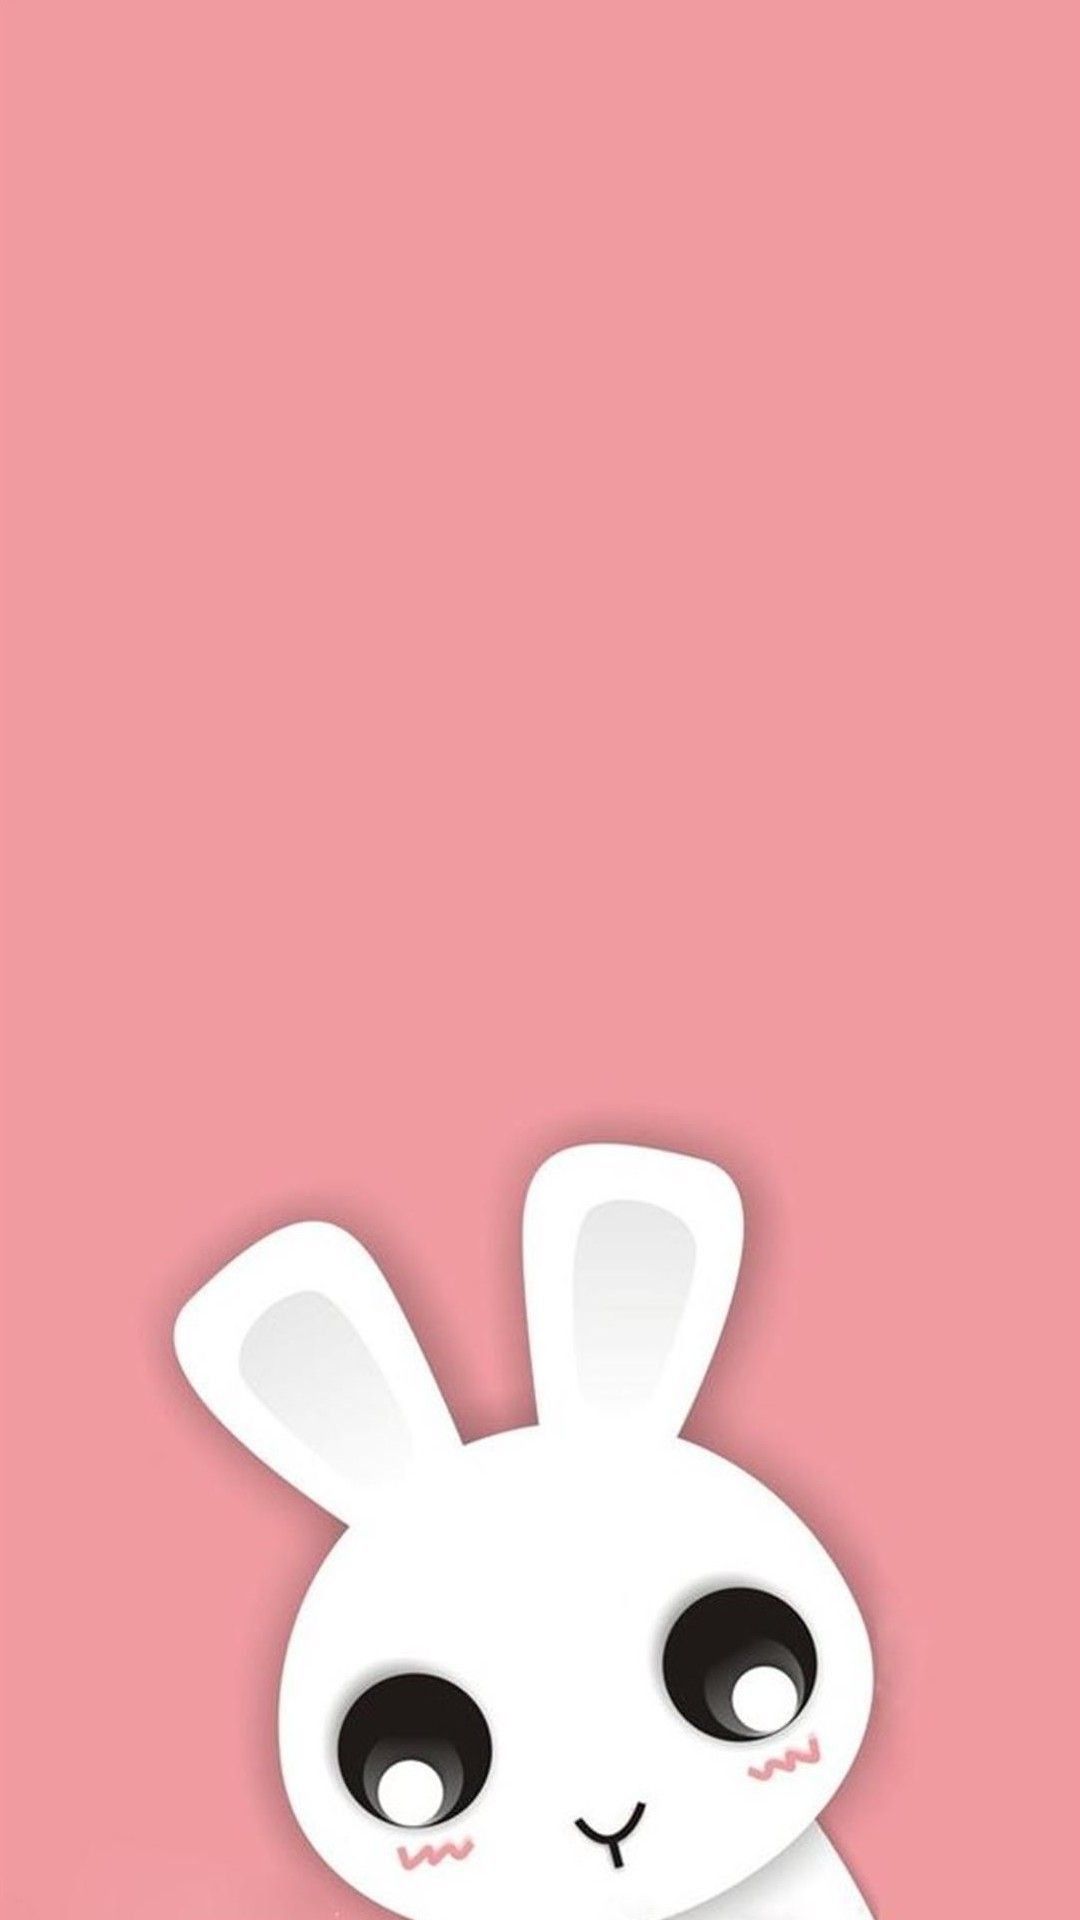 Cute Wallpaper for Android Phone.jpg